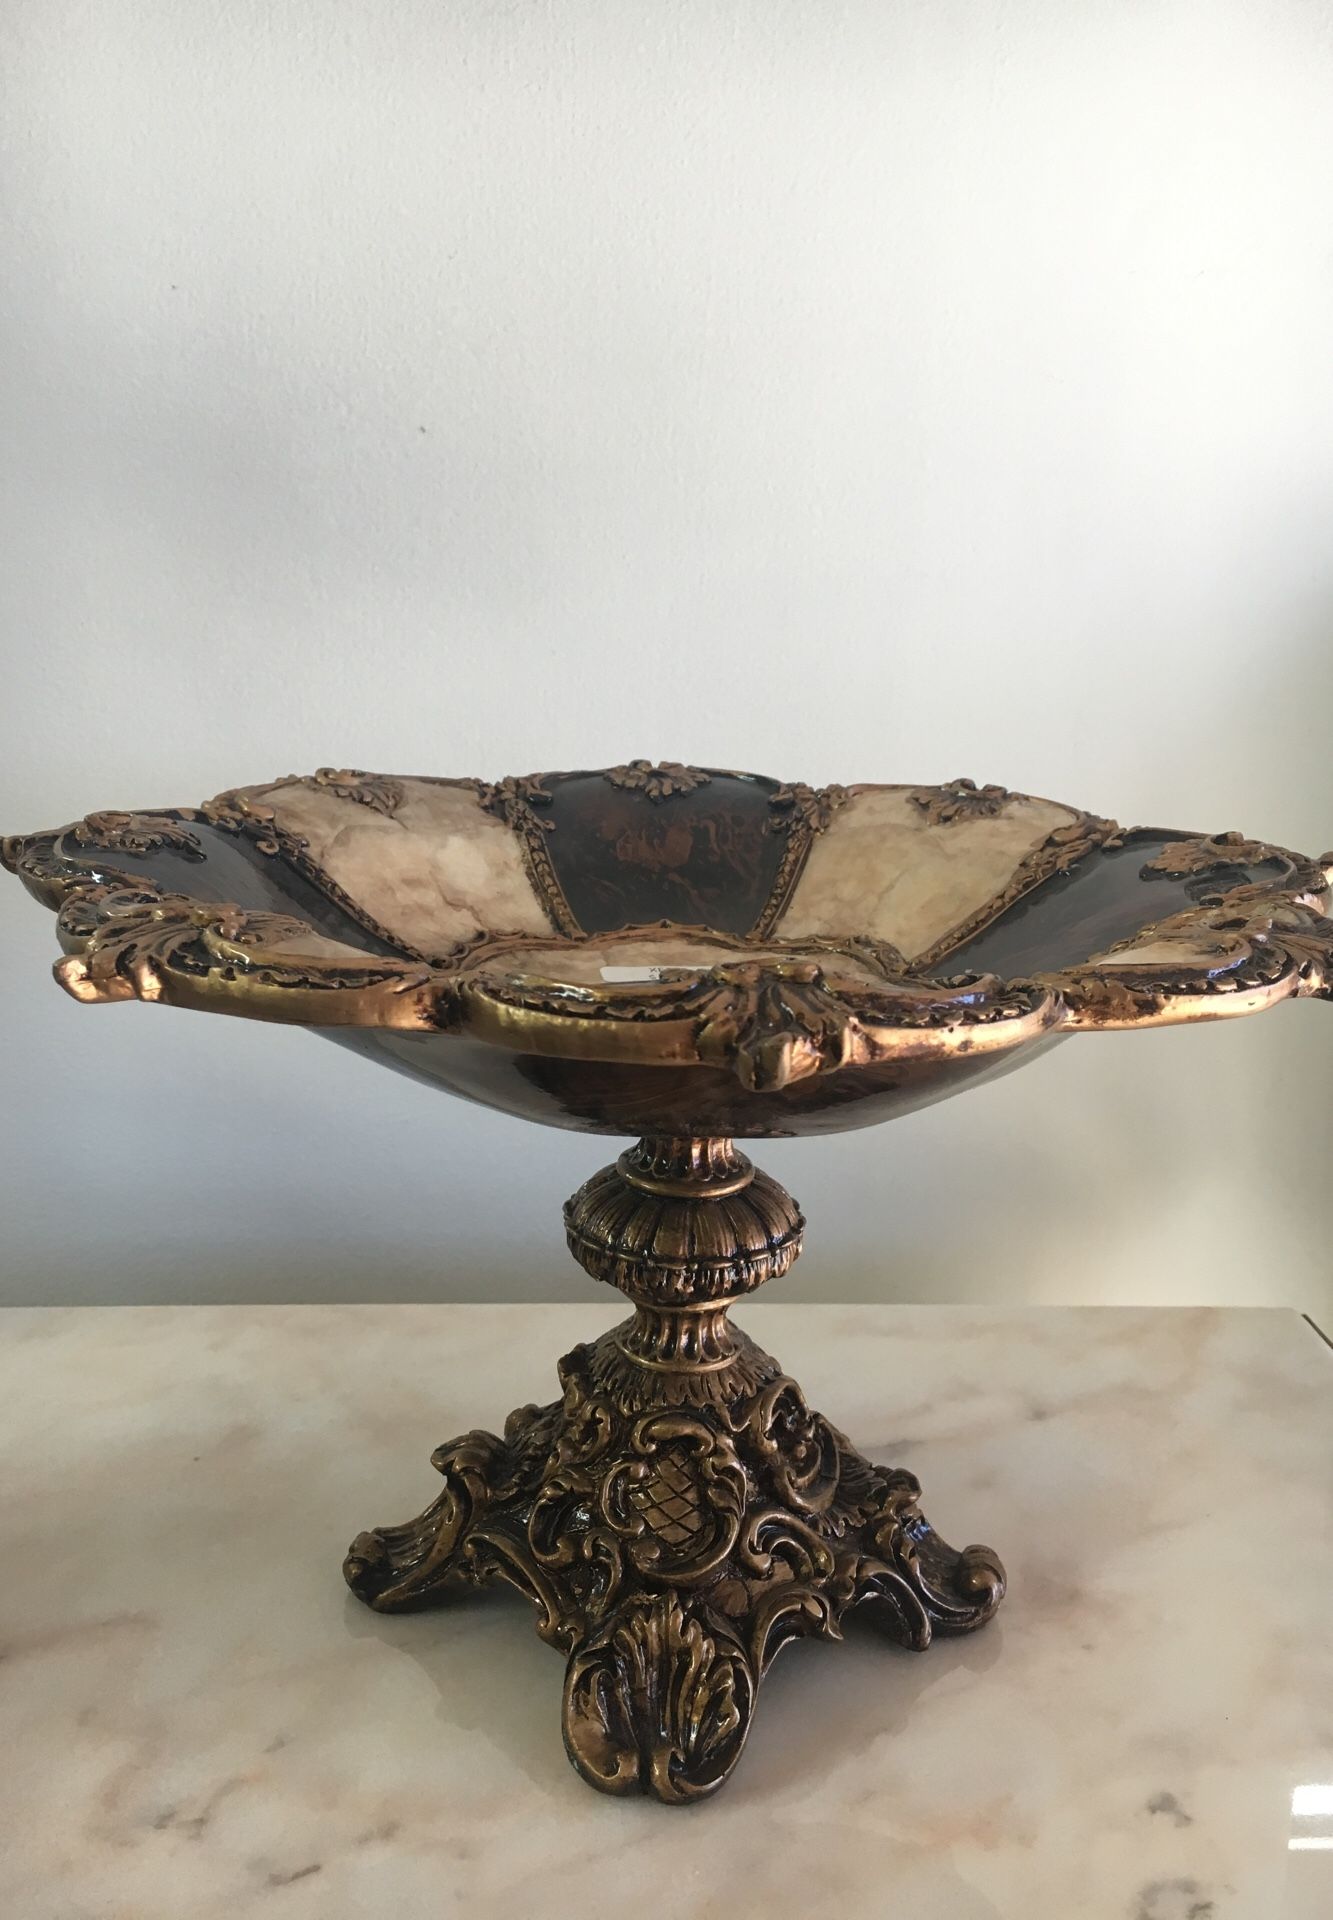 Plate with stand